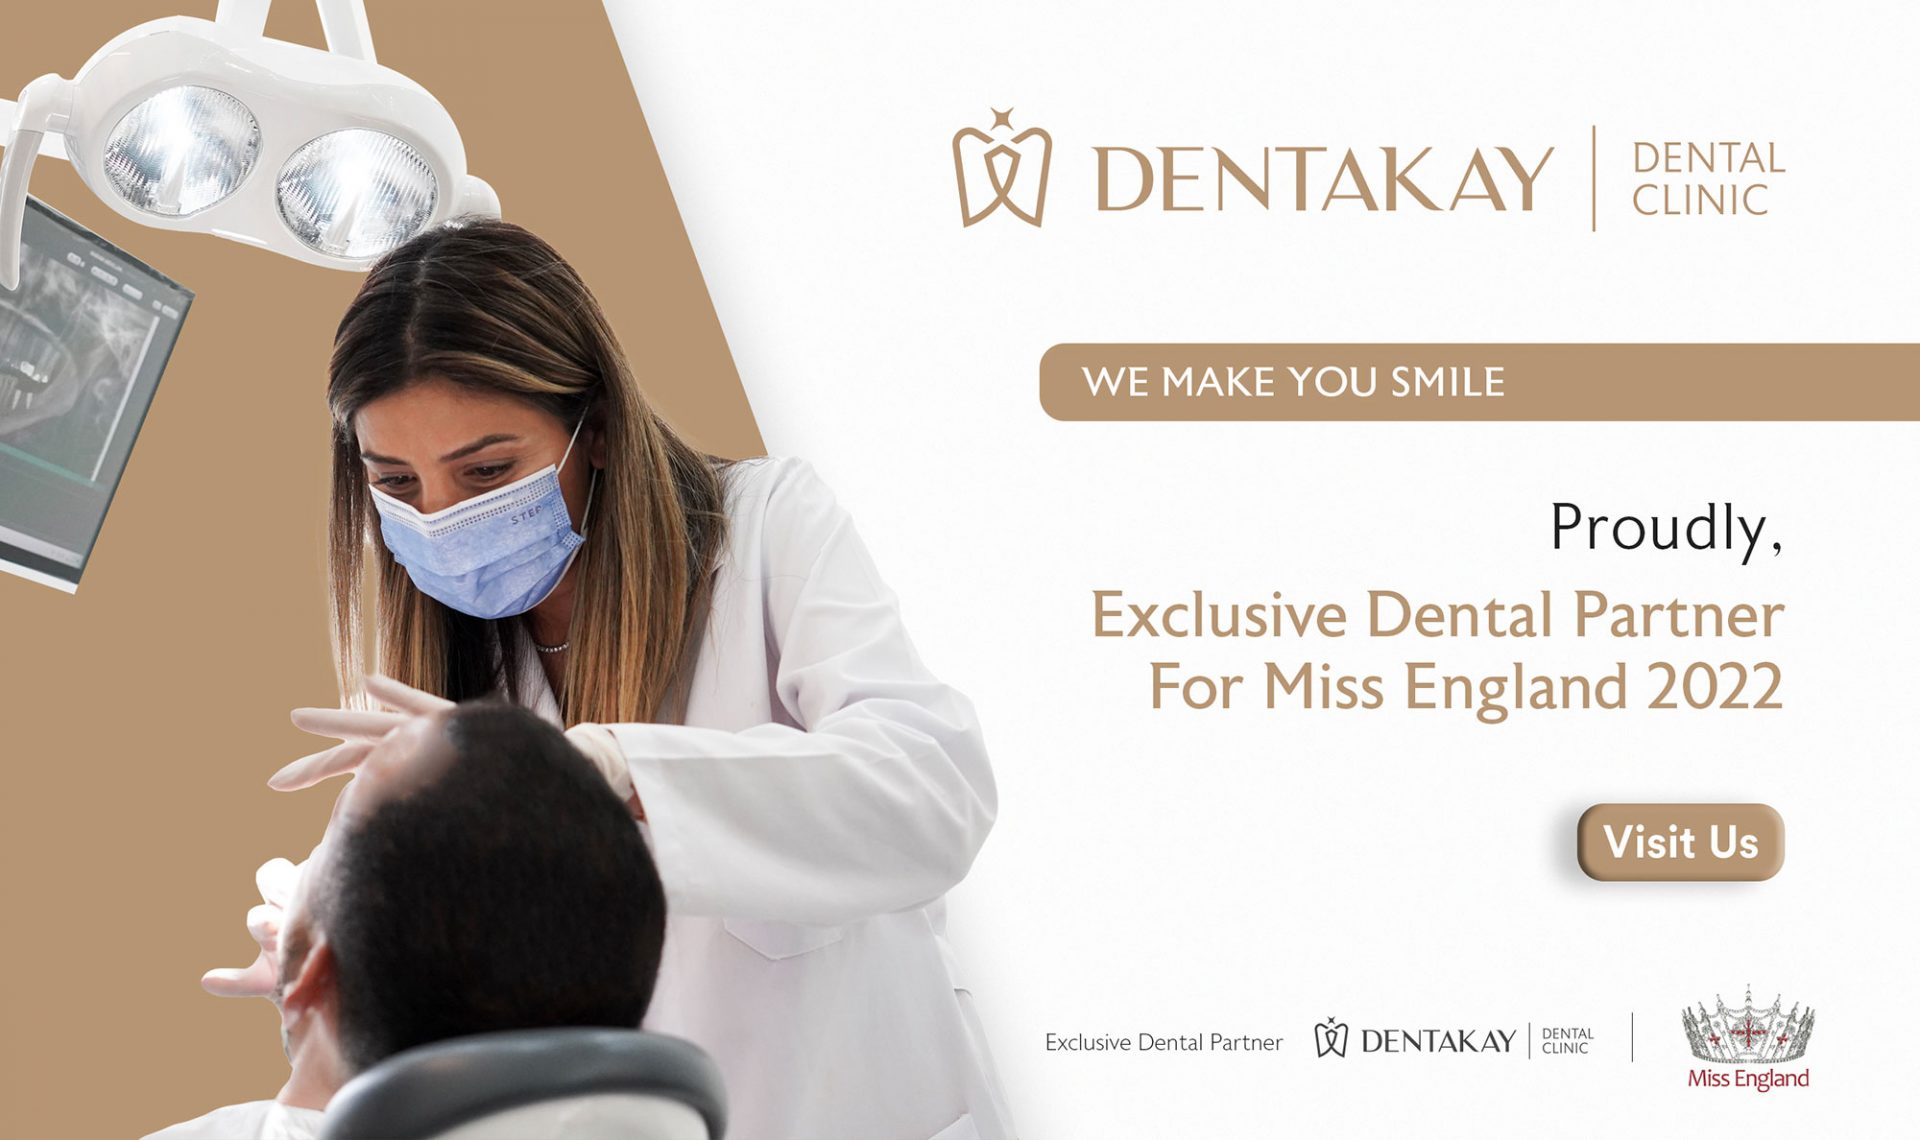 CLAIM YOUR FREE CONSULTATION WITH DENTAKAY